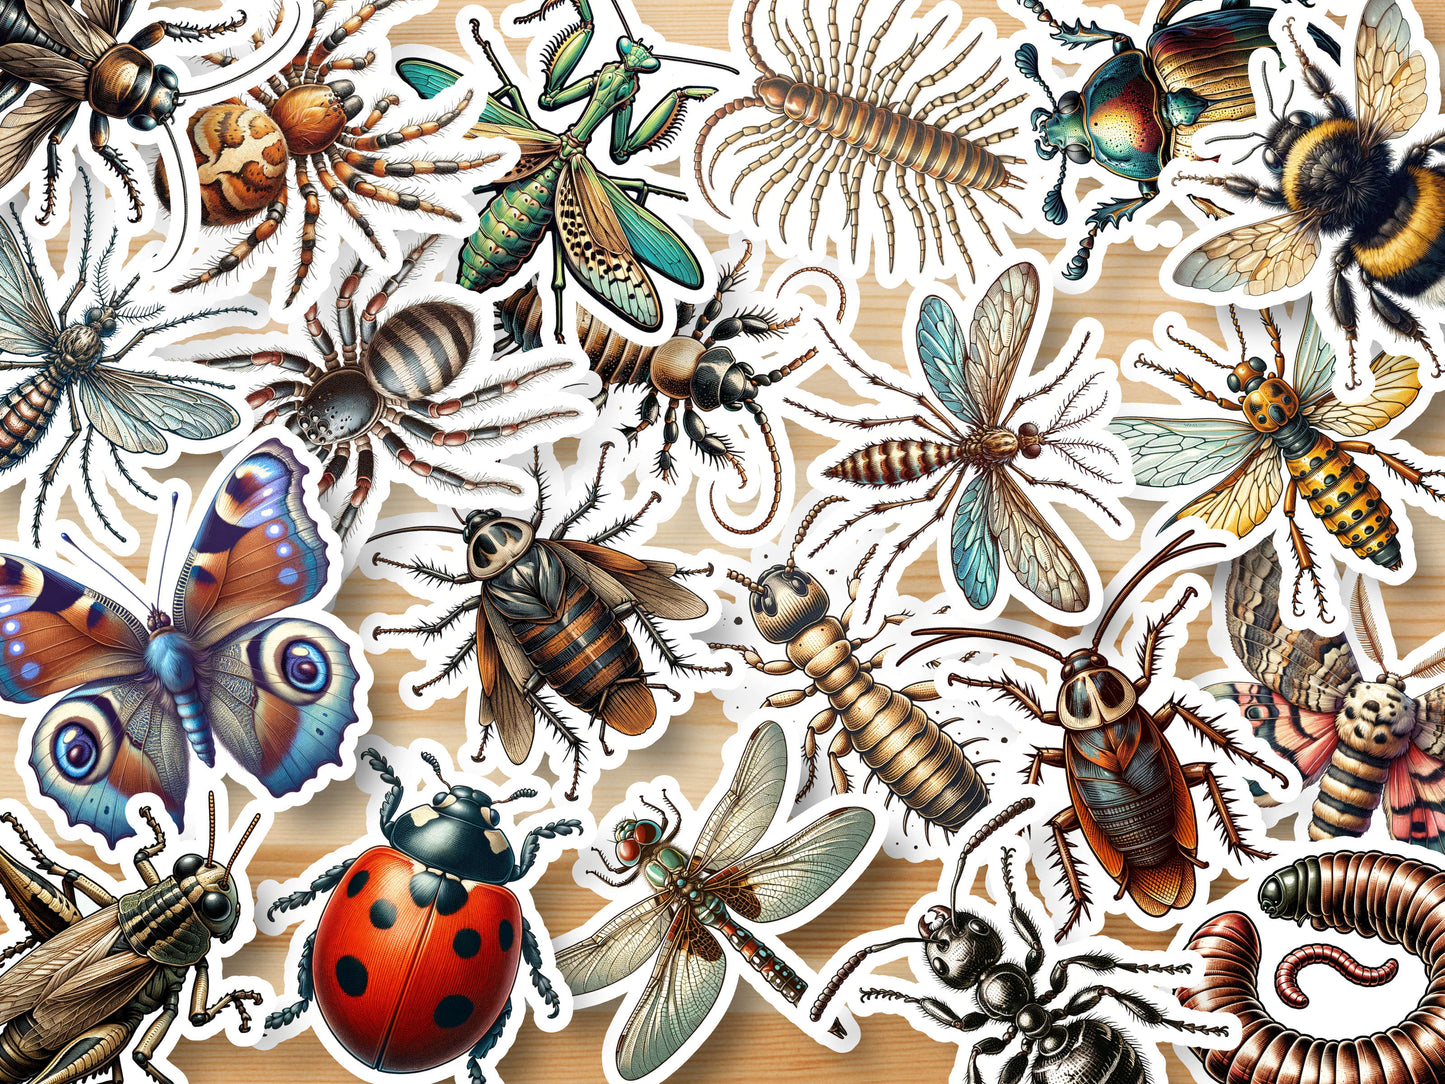 BUGS stickers